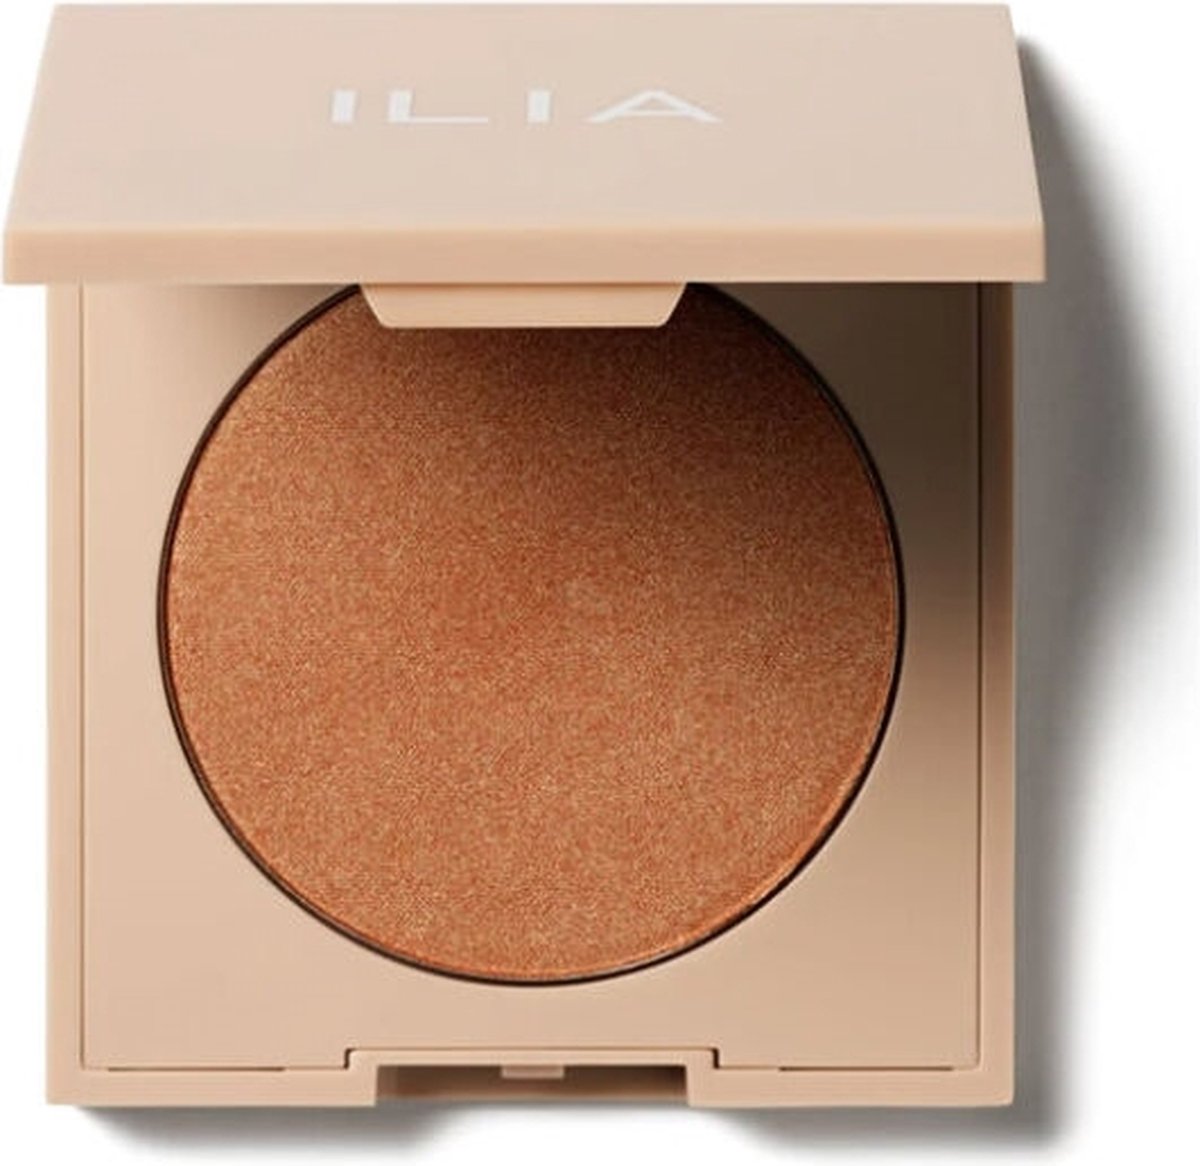 ILIA Beauty Highlighter Face Daylite Highlighting Powder Fame